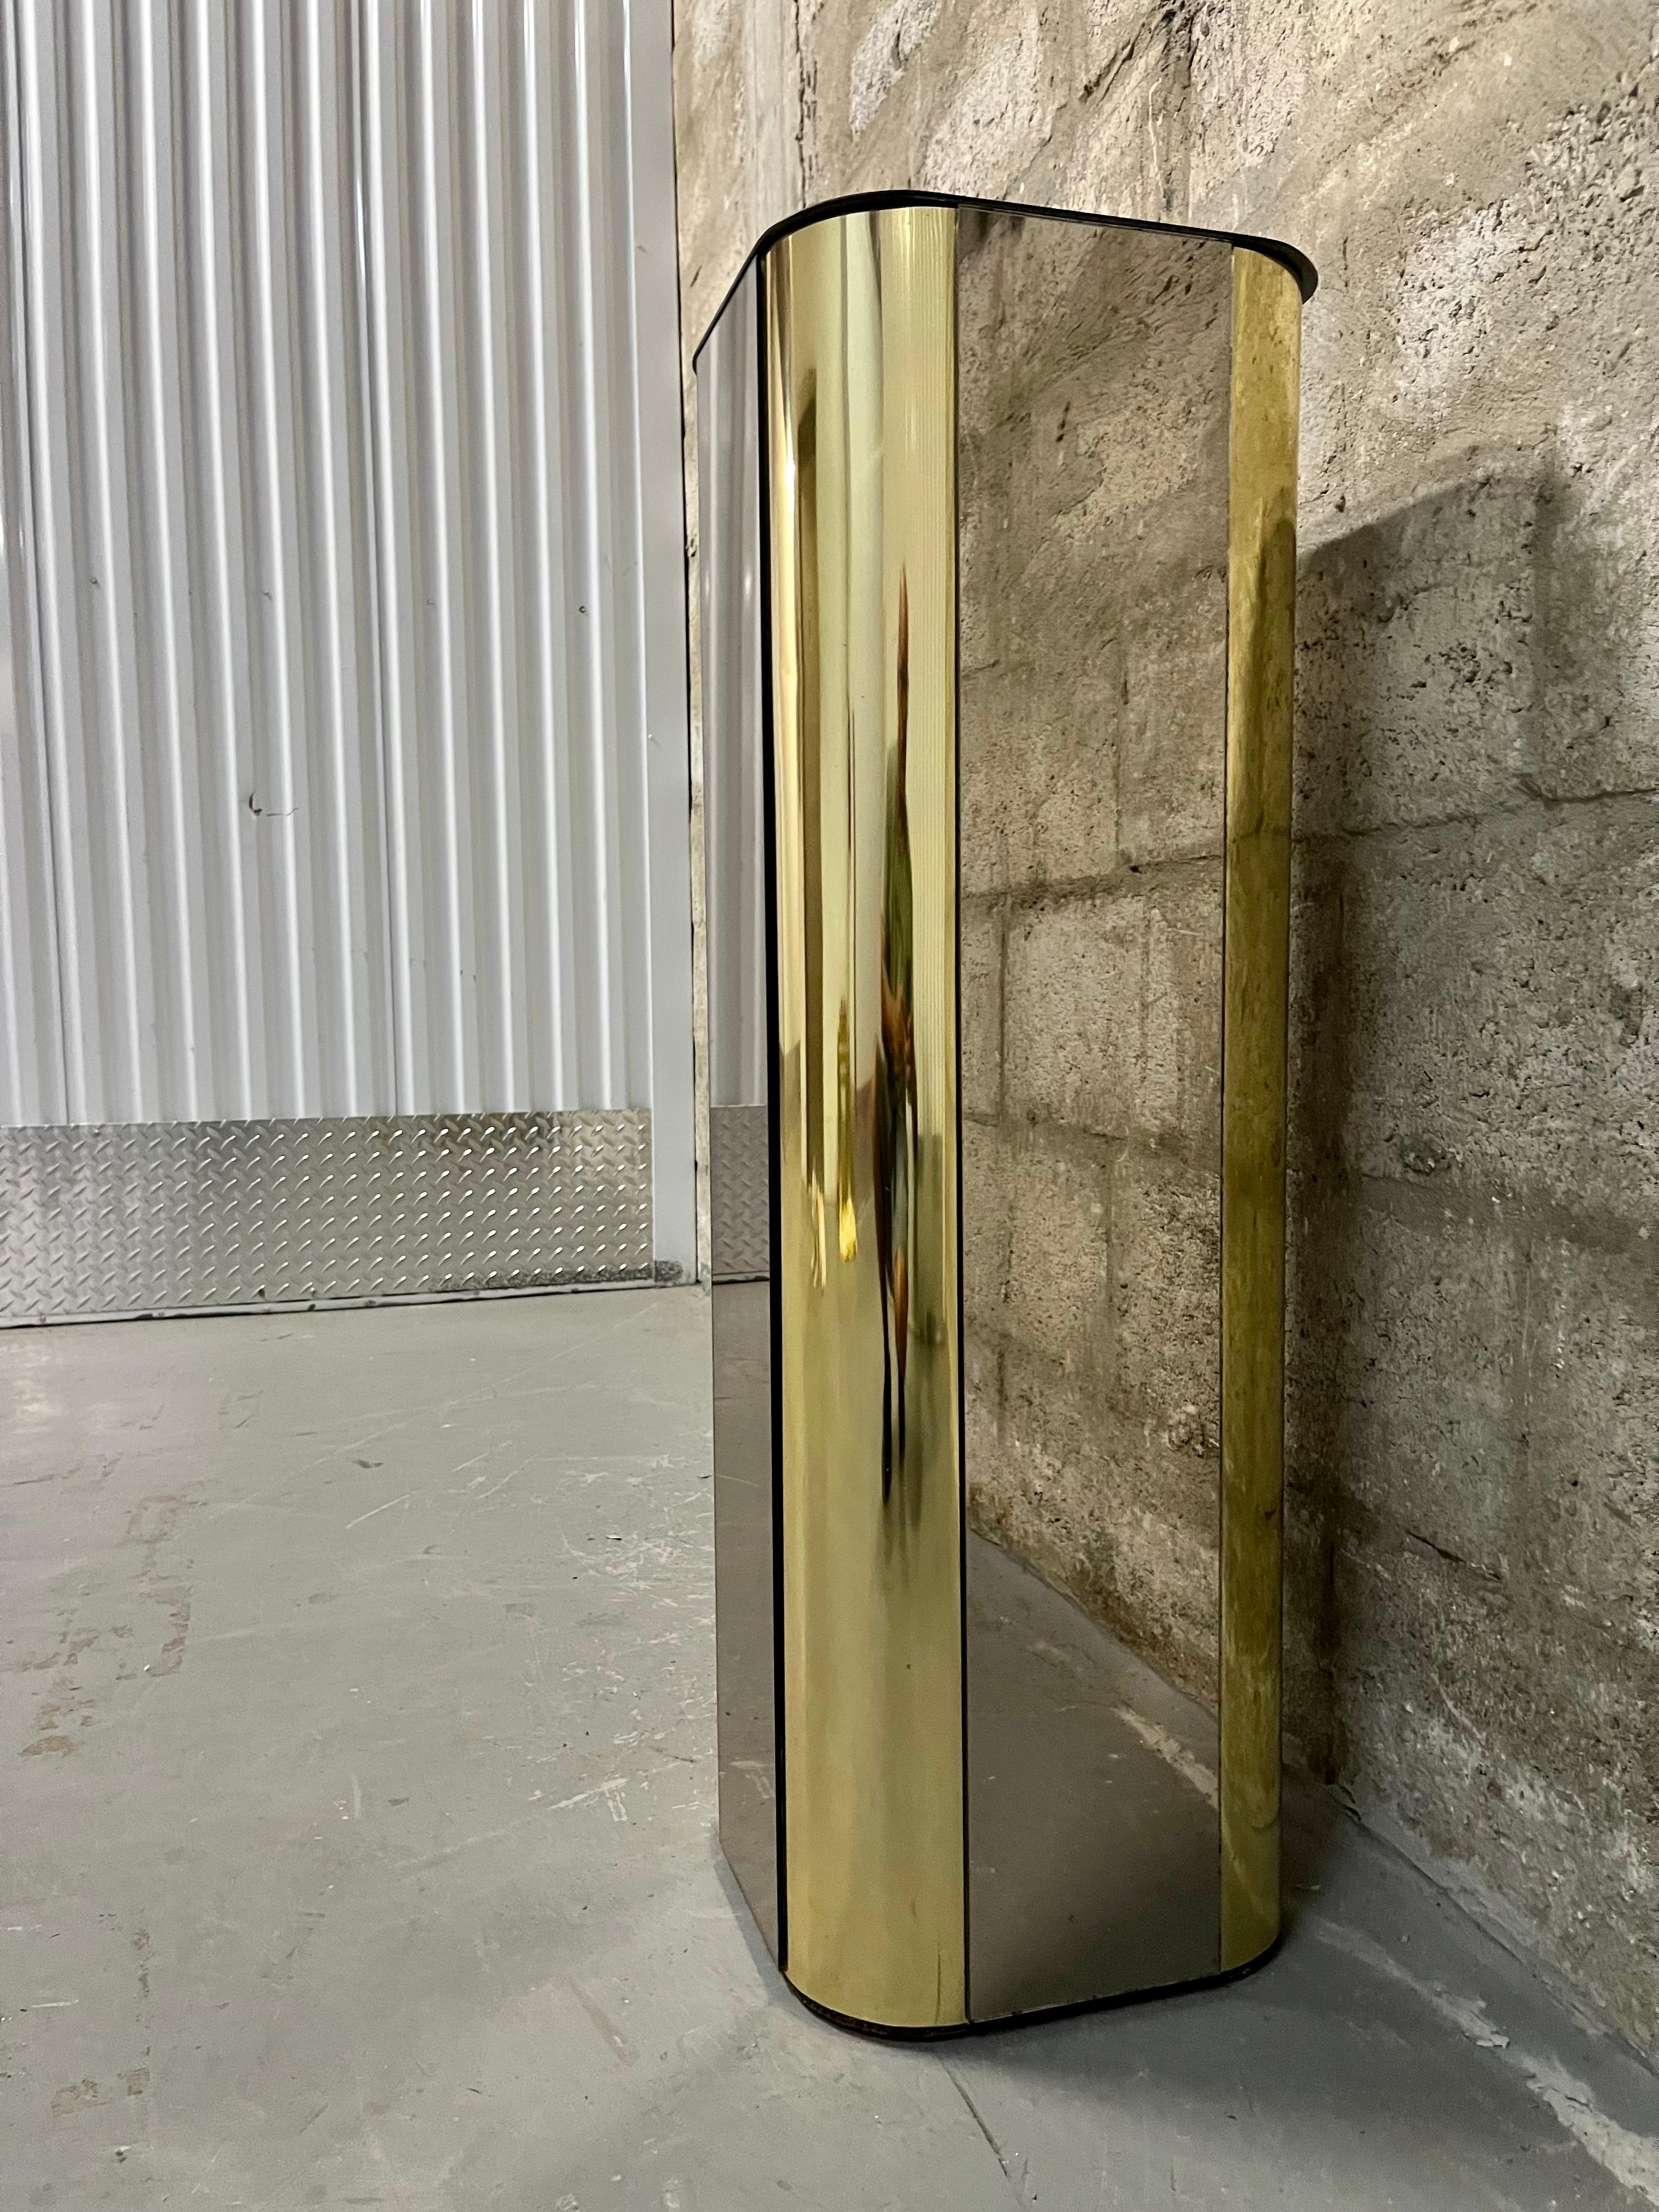 Late 20th Century Hollywood Regency Brass and Smoked Mirror Pedestal in the Curtis Jere's Style.